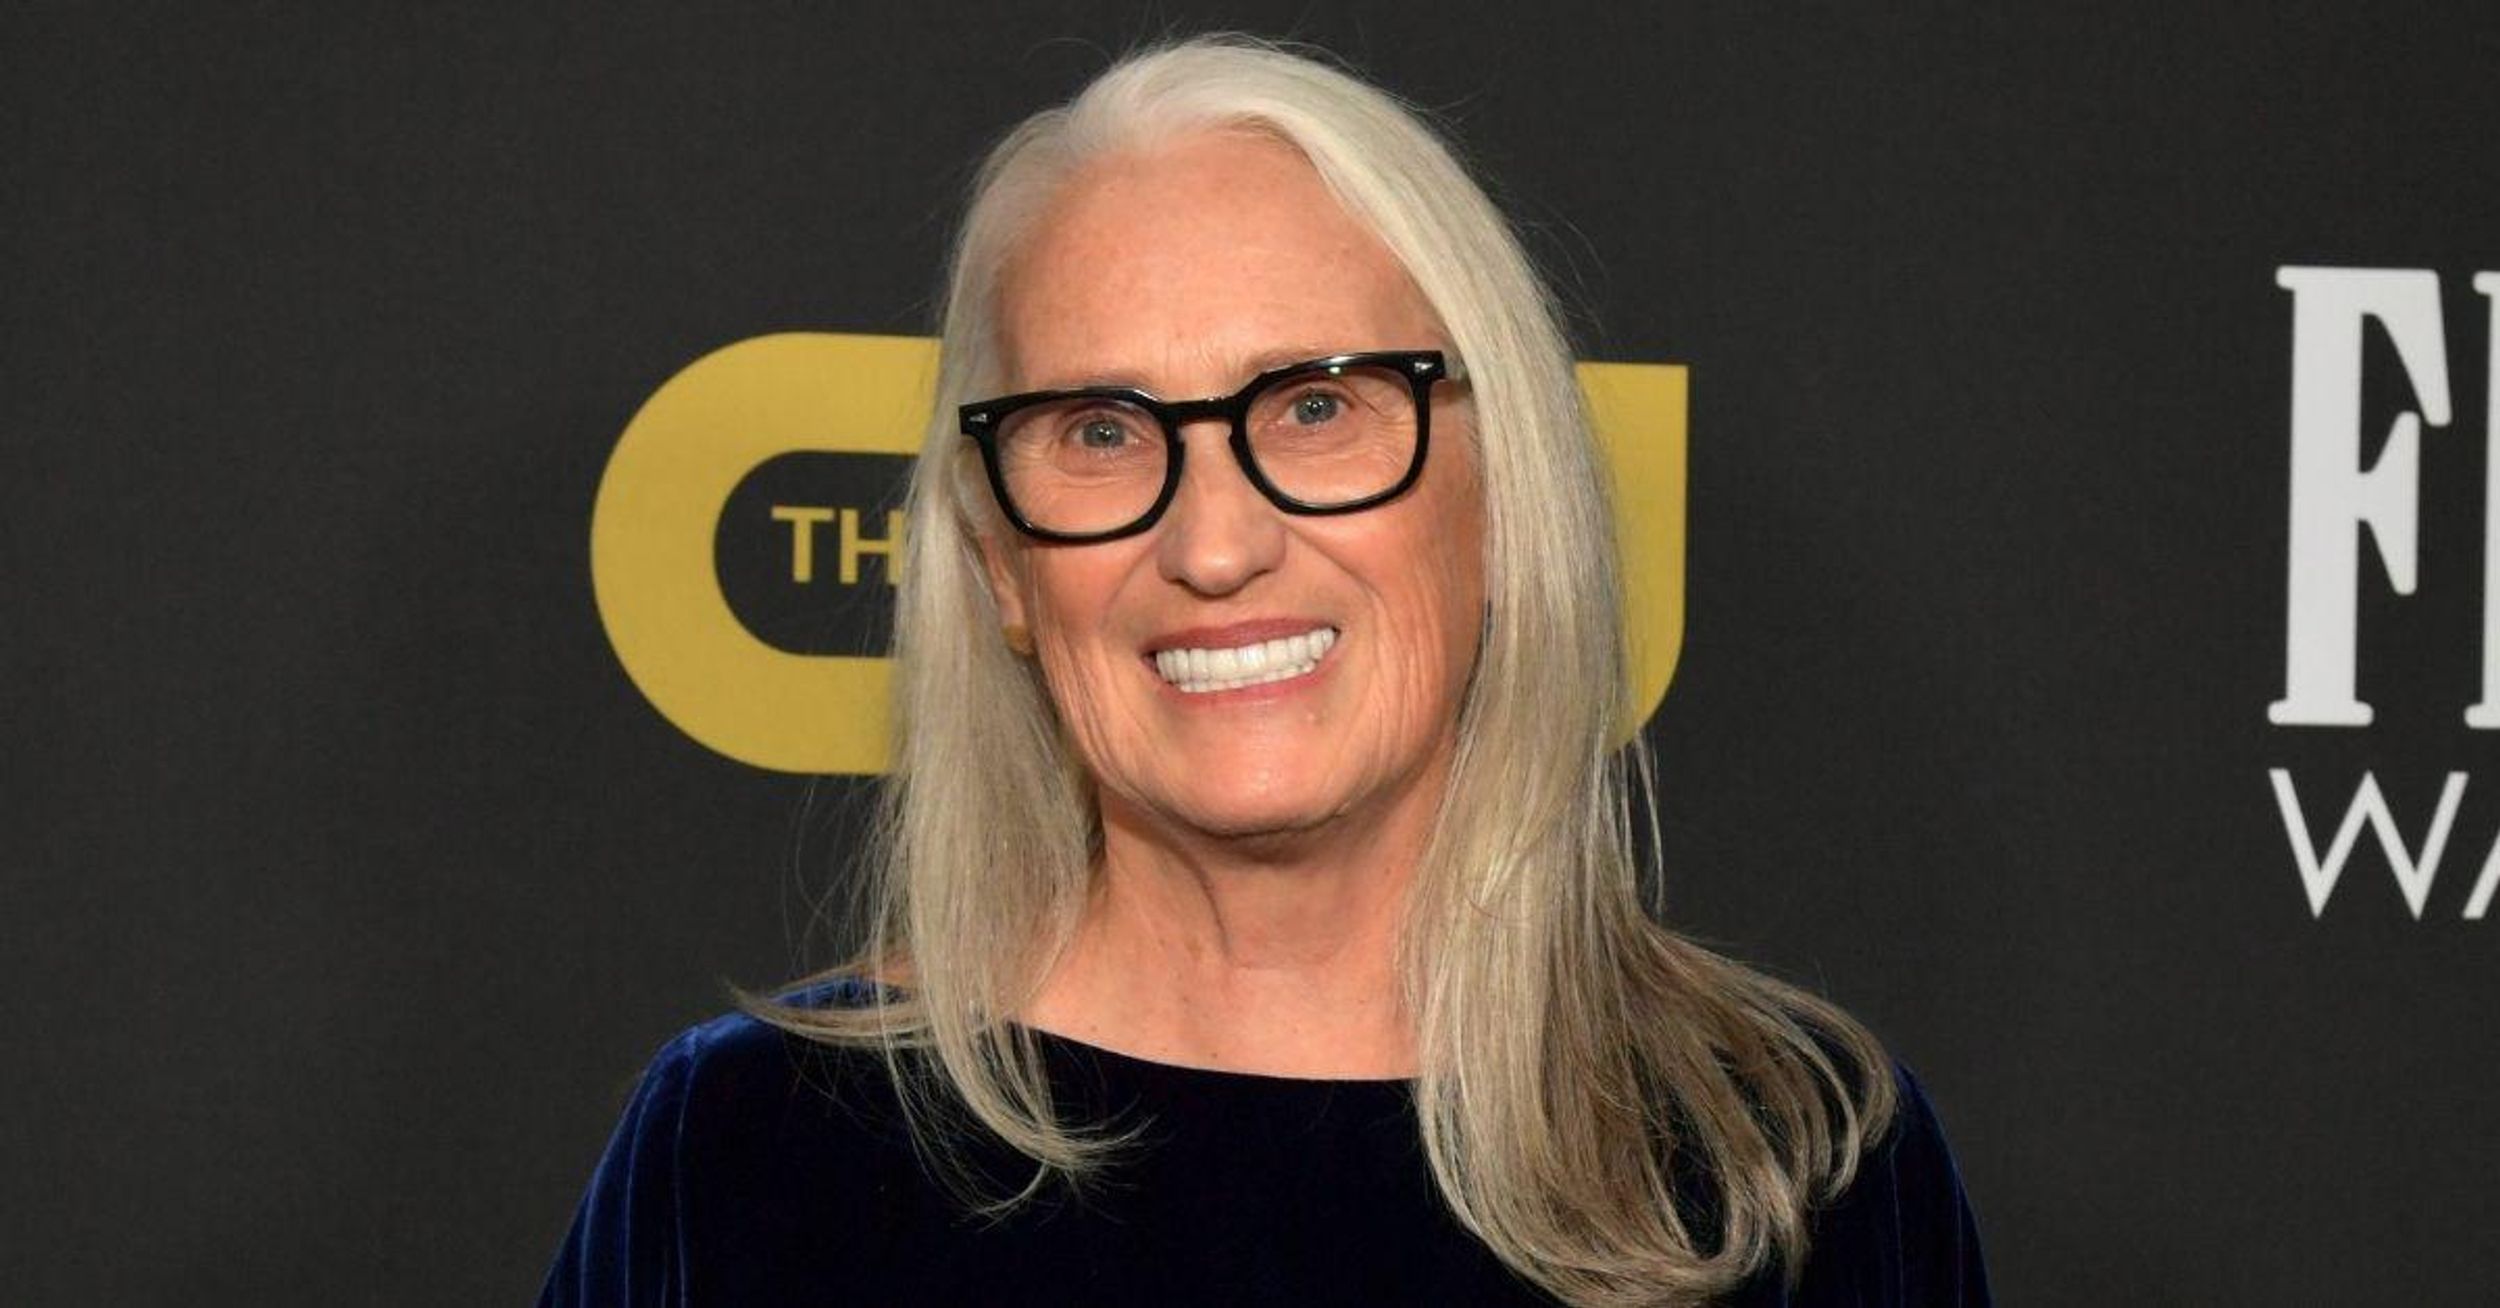 Director Jane Campion Apologizes After Saying Venus And Serena Don't Compete Against Men Like She Does